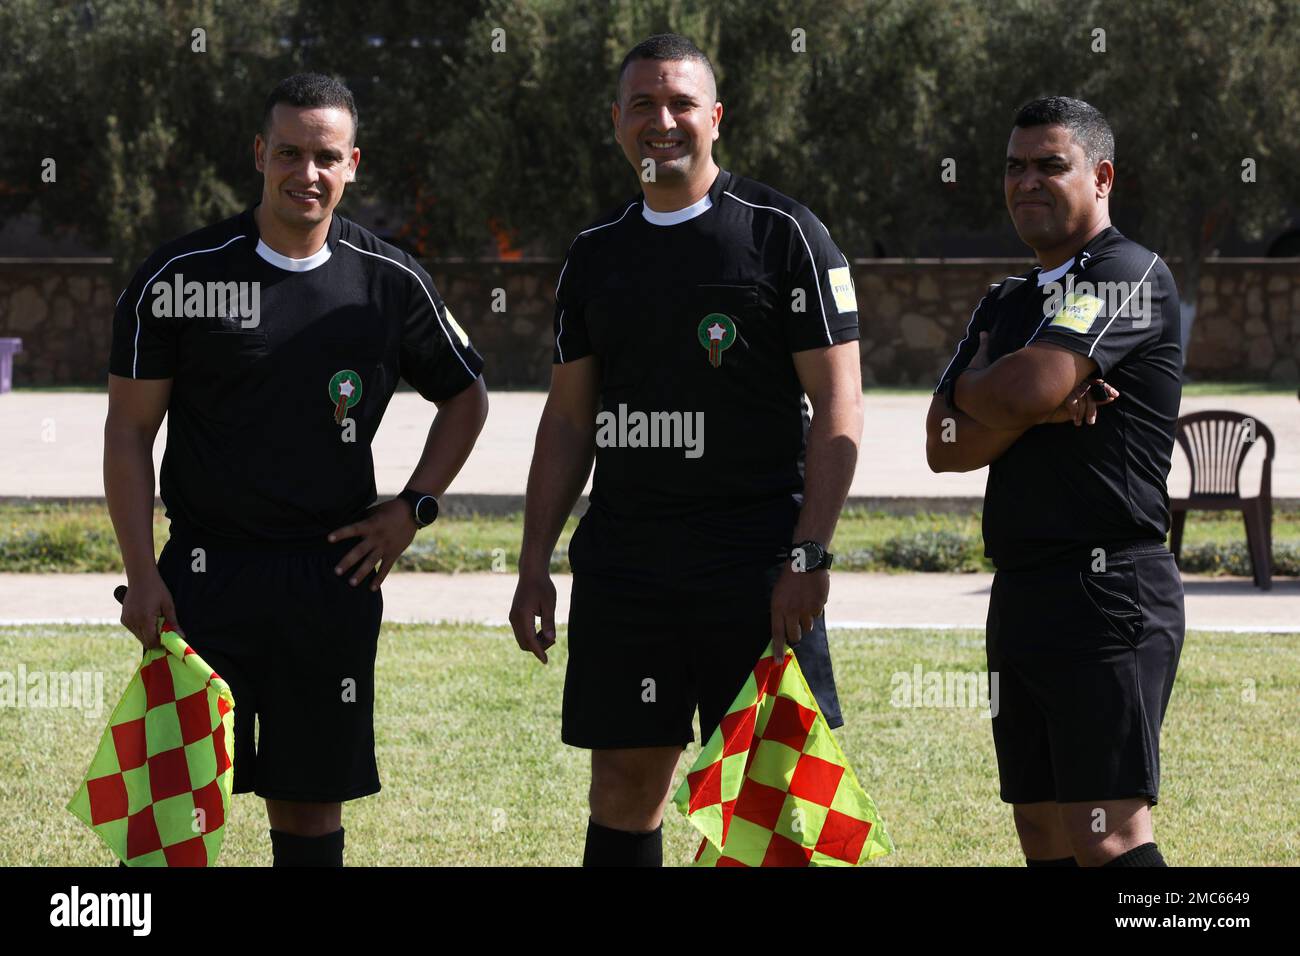 The referees pose for a photo before a camaraderie-building multinational soccer game during African Lion 22 at Southern Zone Headquarters, Agadir, Morocco, June 25, 2022. African Lion 22 is U.S. Africa Command's largest, premier, joint, annual exercise hosted by Morocco, Ghana, Senegal and Tunisia, June 6 - 30. More than 7,500 participants from 28 nations and NATO train together with a focus on enhancing readiness for U.S. and partner nation forces. AL22 is a joint all-domain, multi-component, and multinational exercise, employing a full array of mission capabilities with the goal to strength Stock Photo